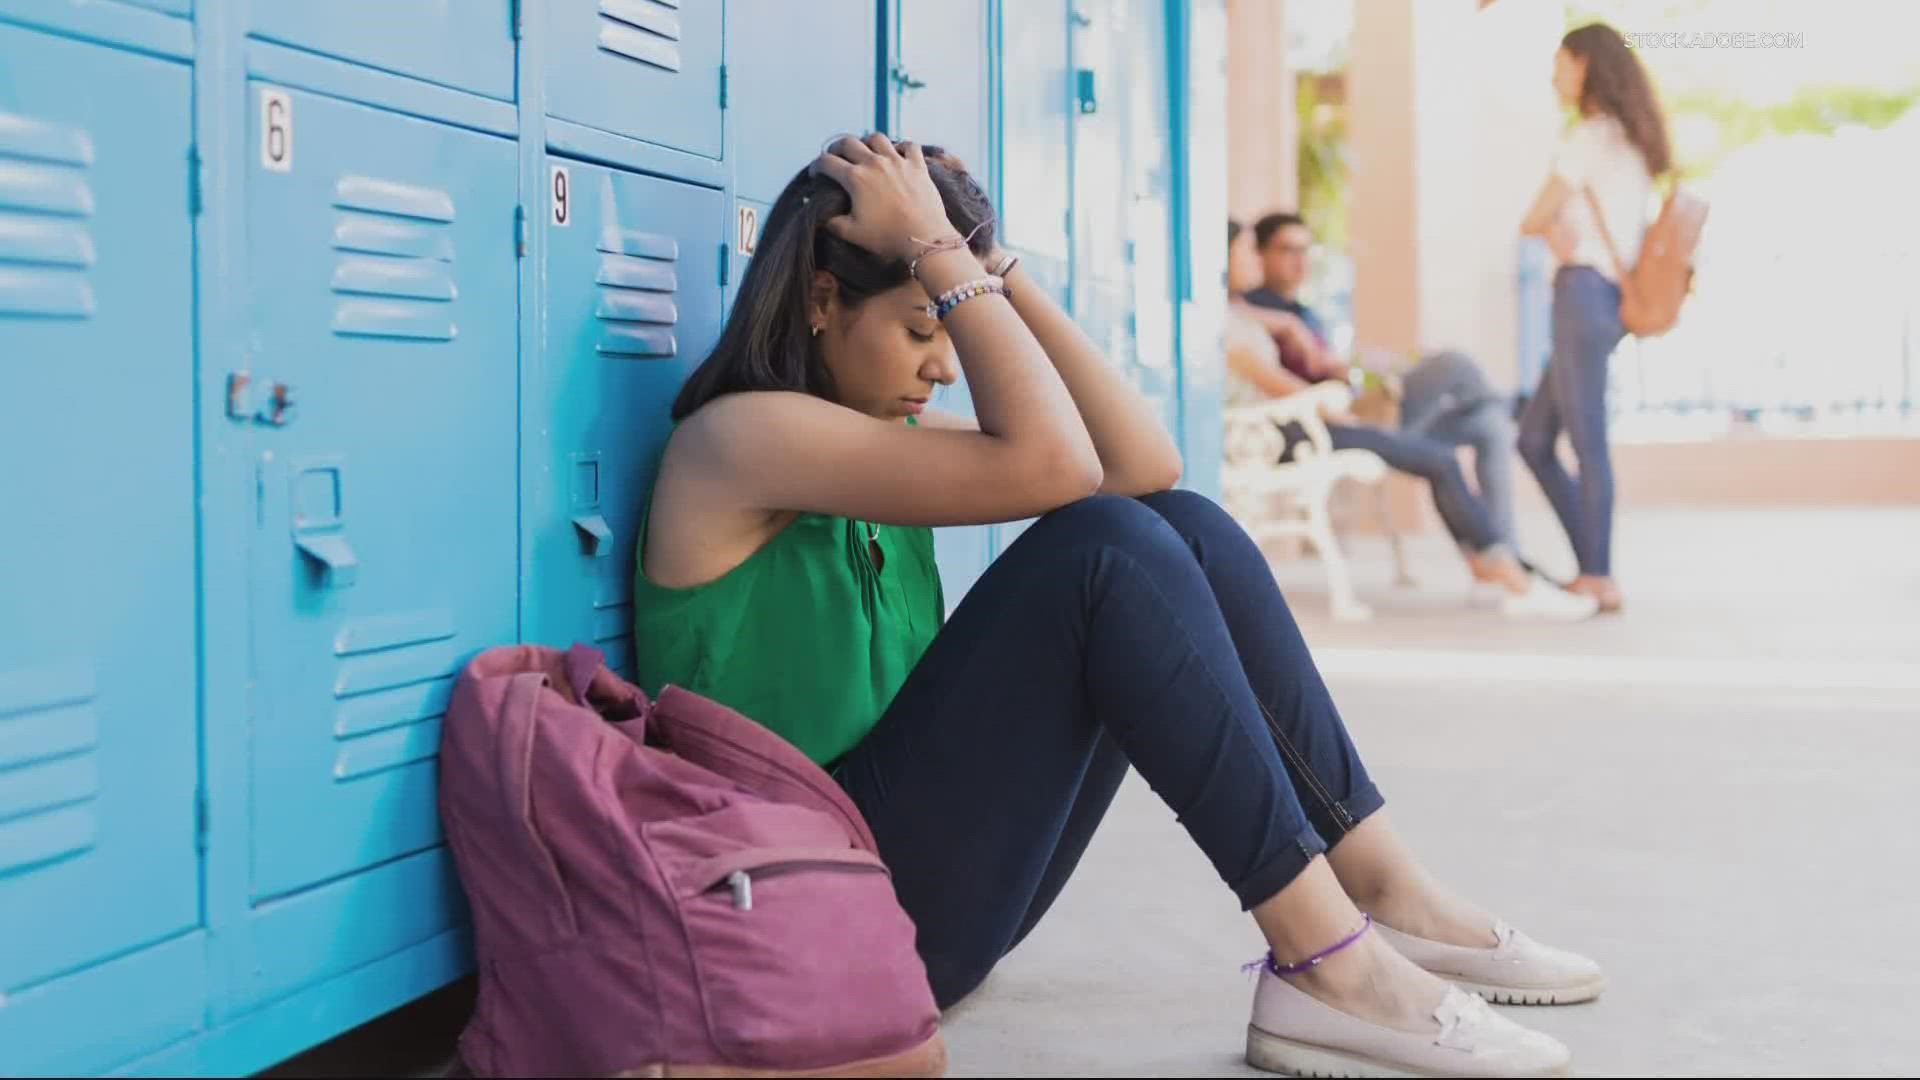 The CDC this week released findings from a recent survey. They asked nearly 8,000 high school students to share how they felt in 2020.